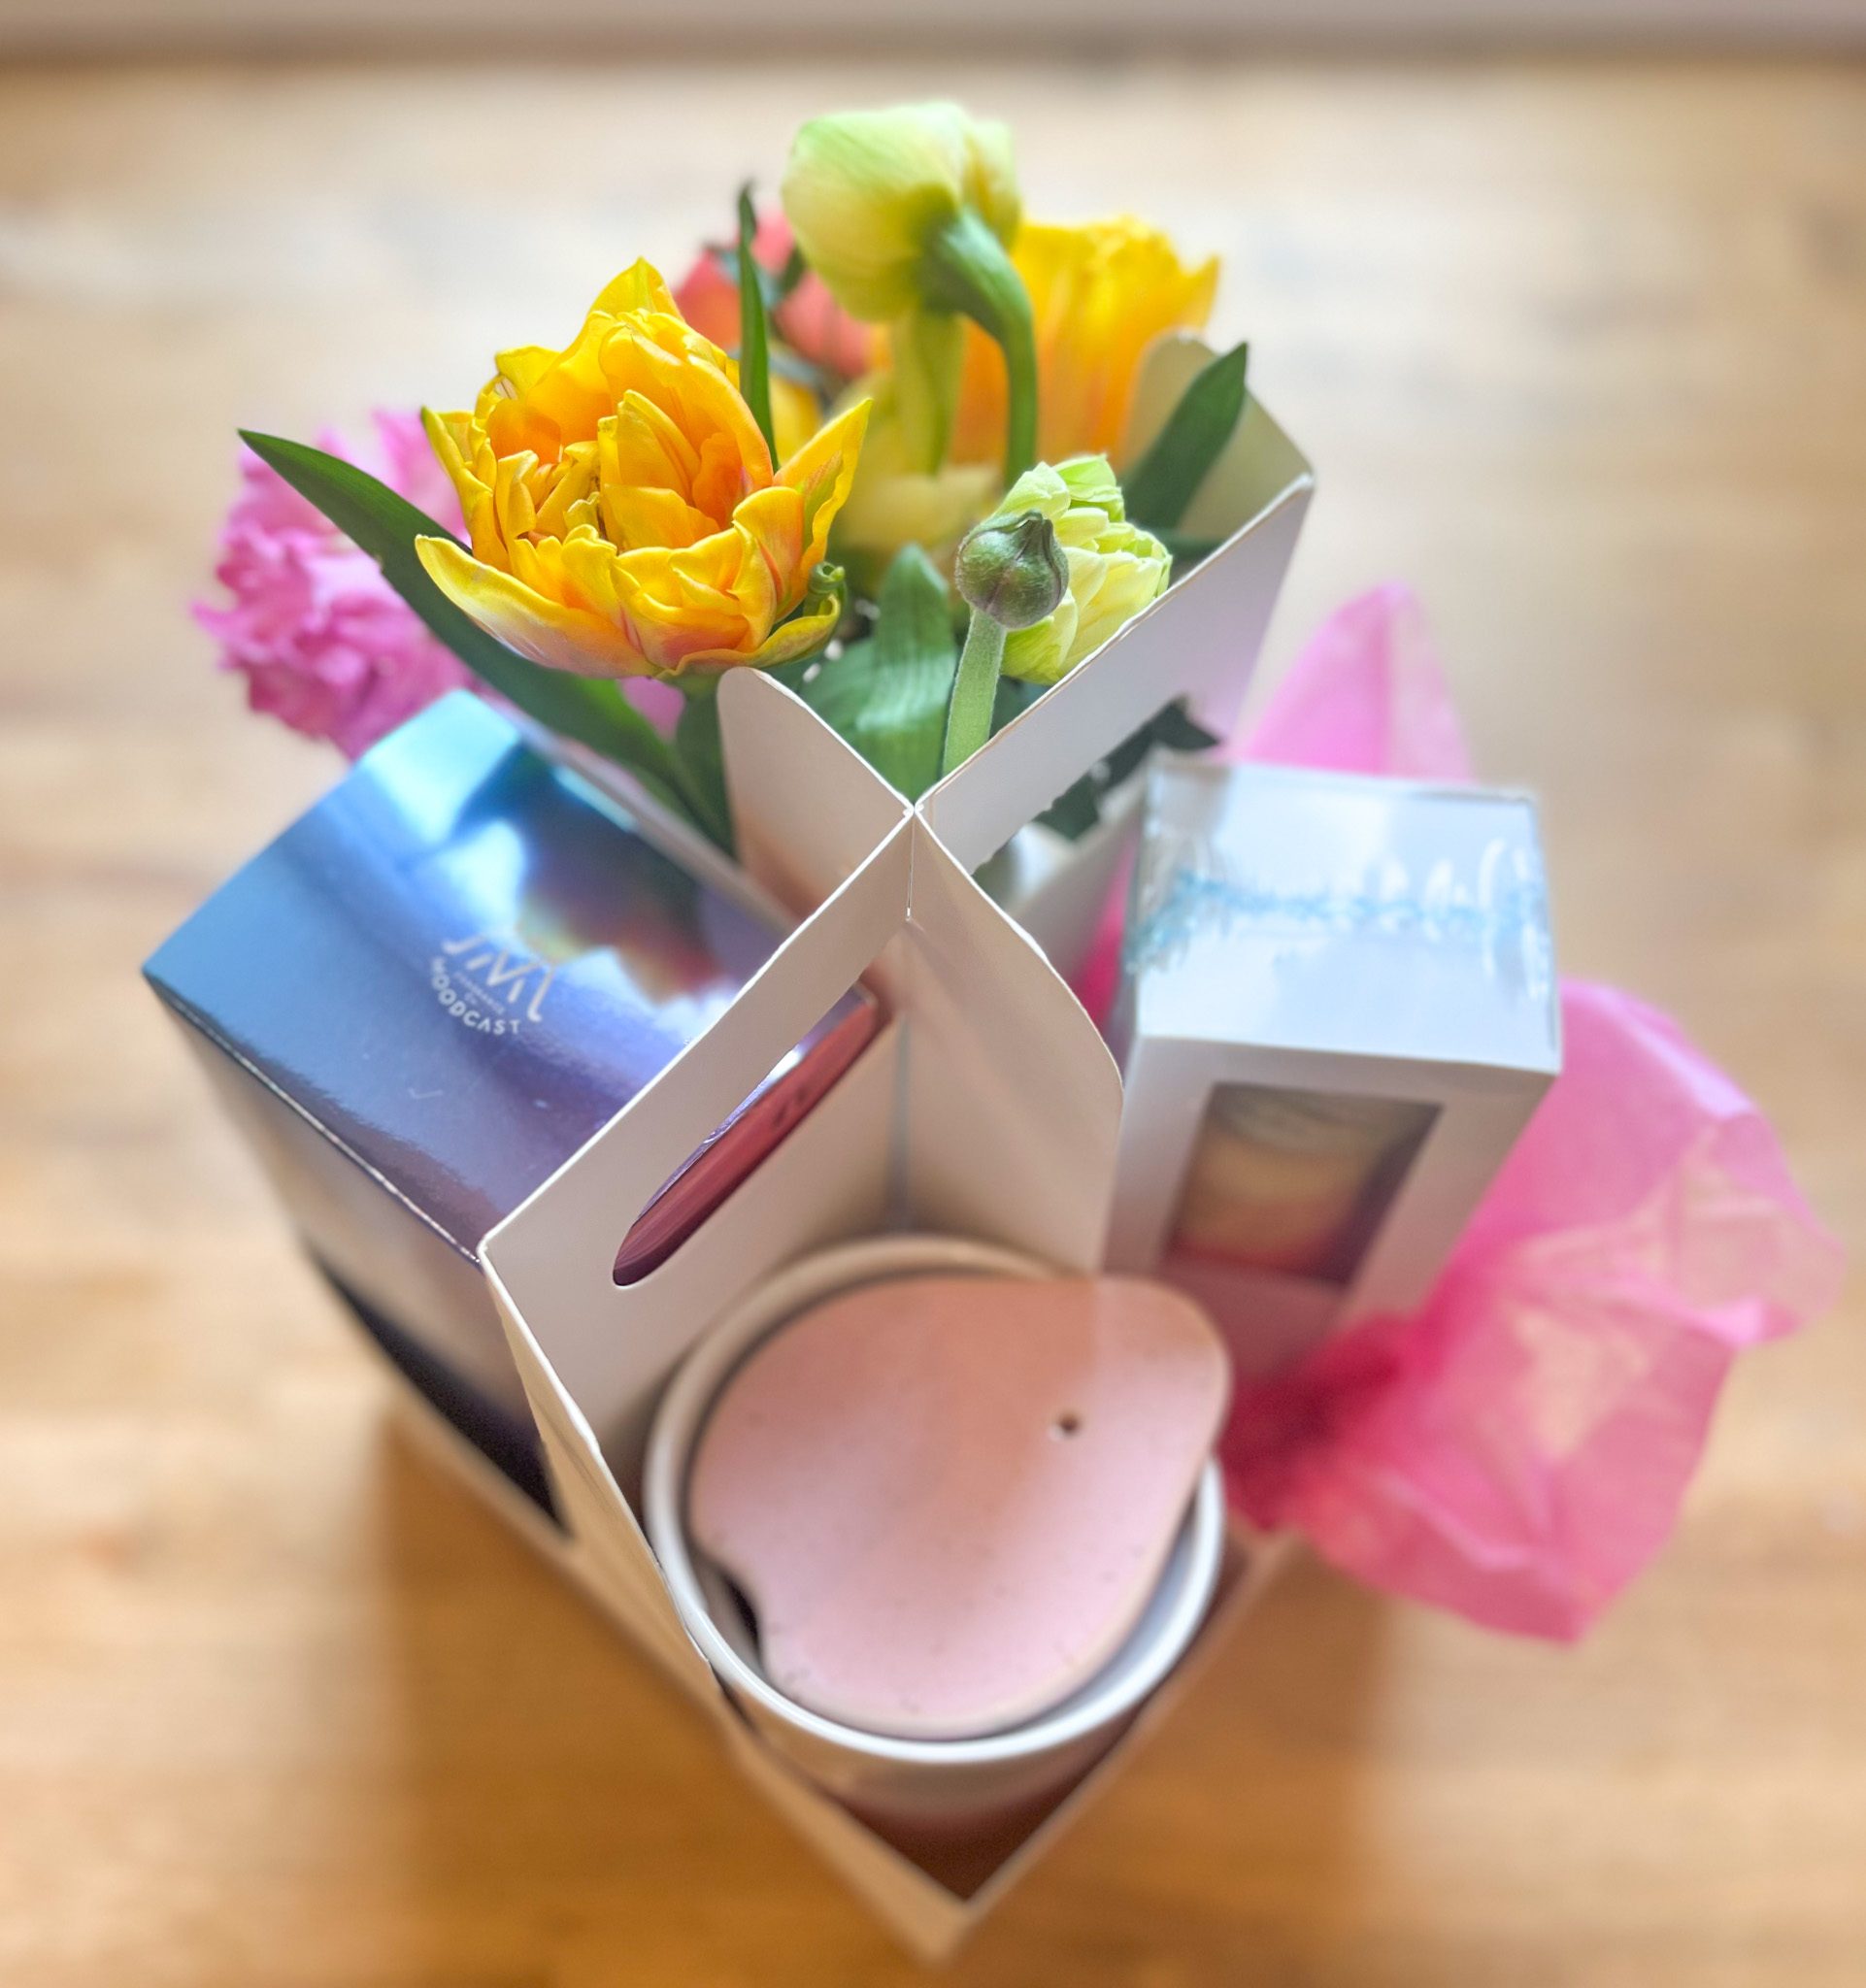 The perfect gift for Mom! A chic travel mug, sweet reed diffuser, vibrant flowers and treats from Queen Bee's.